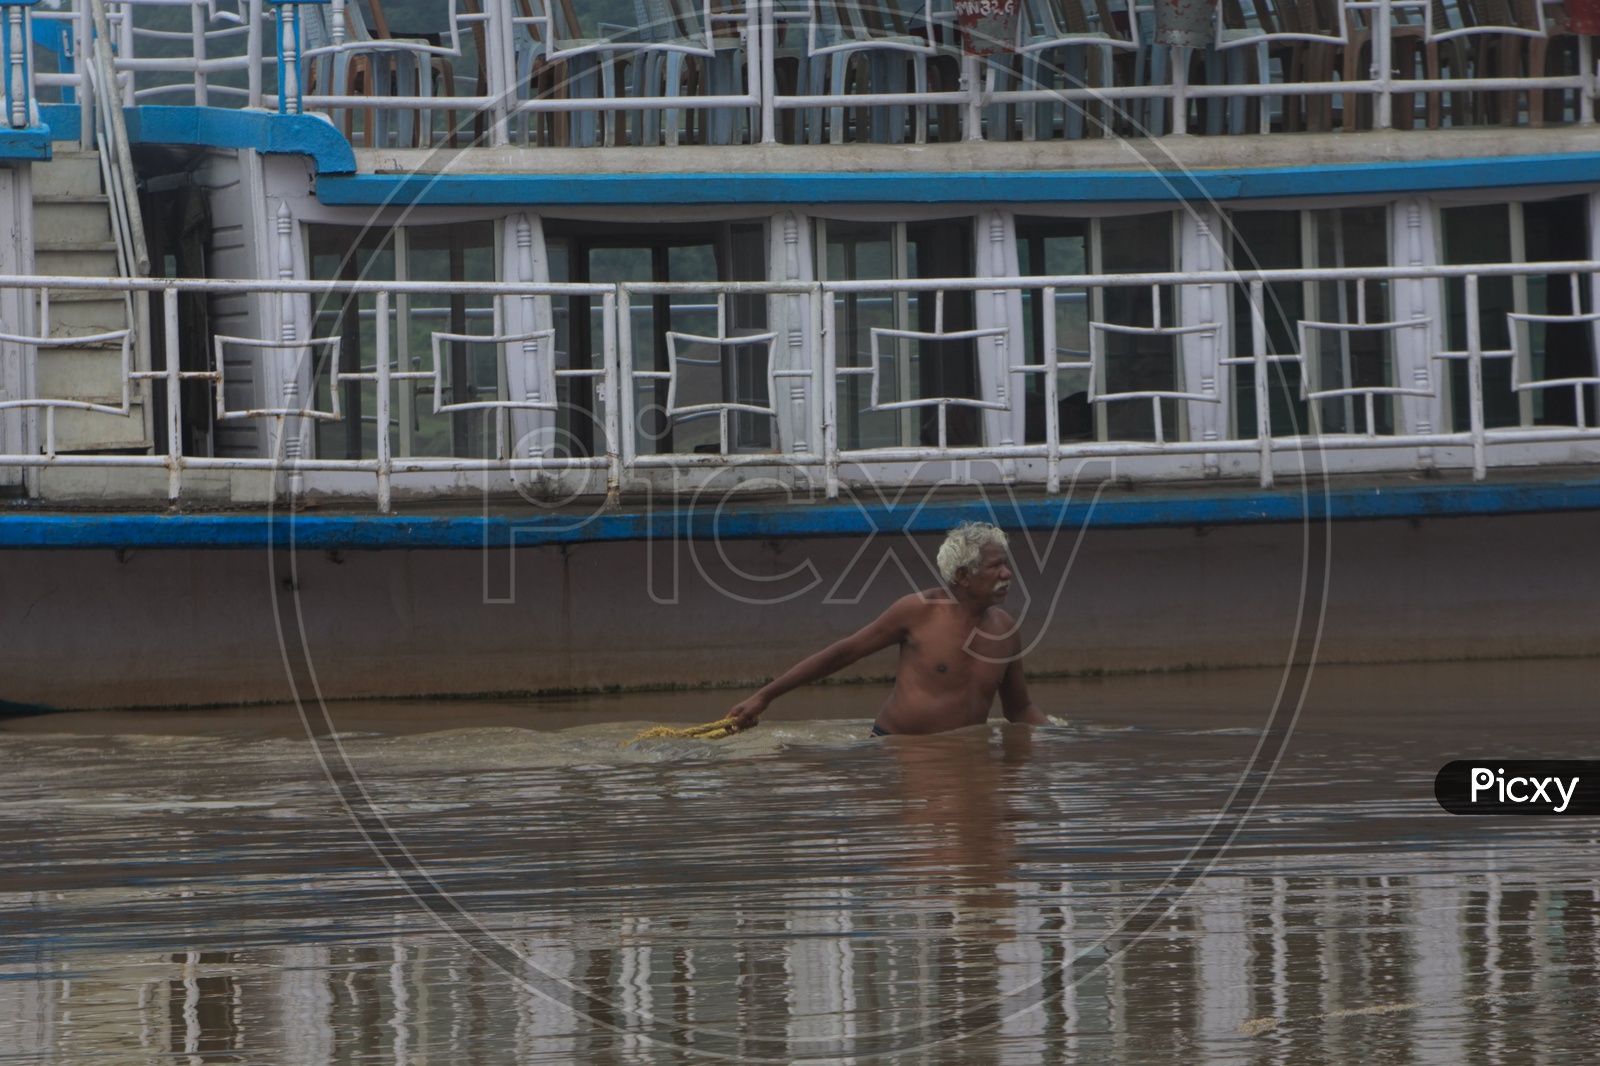 An Oldman Pulling the rope of a boat on the bank of river Godavari.